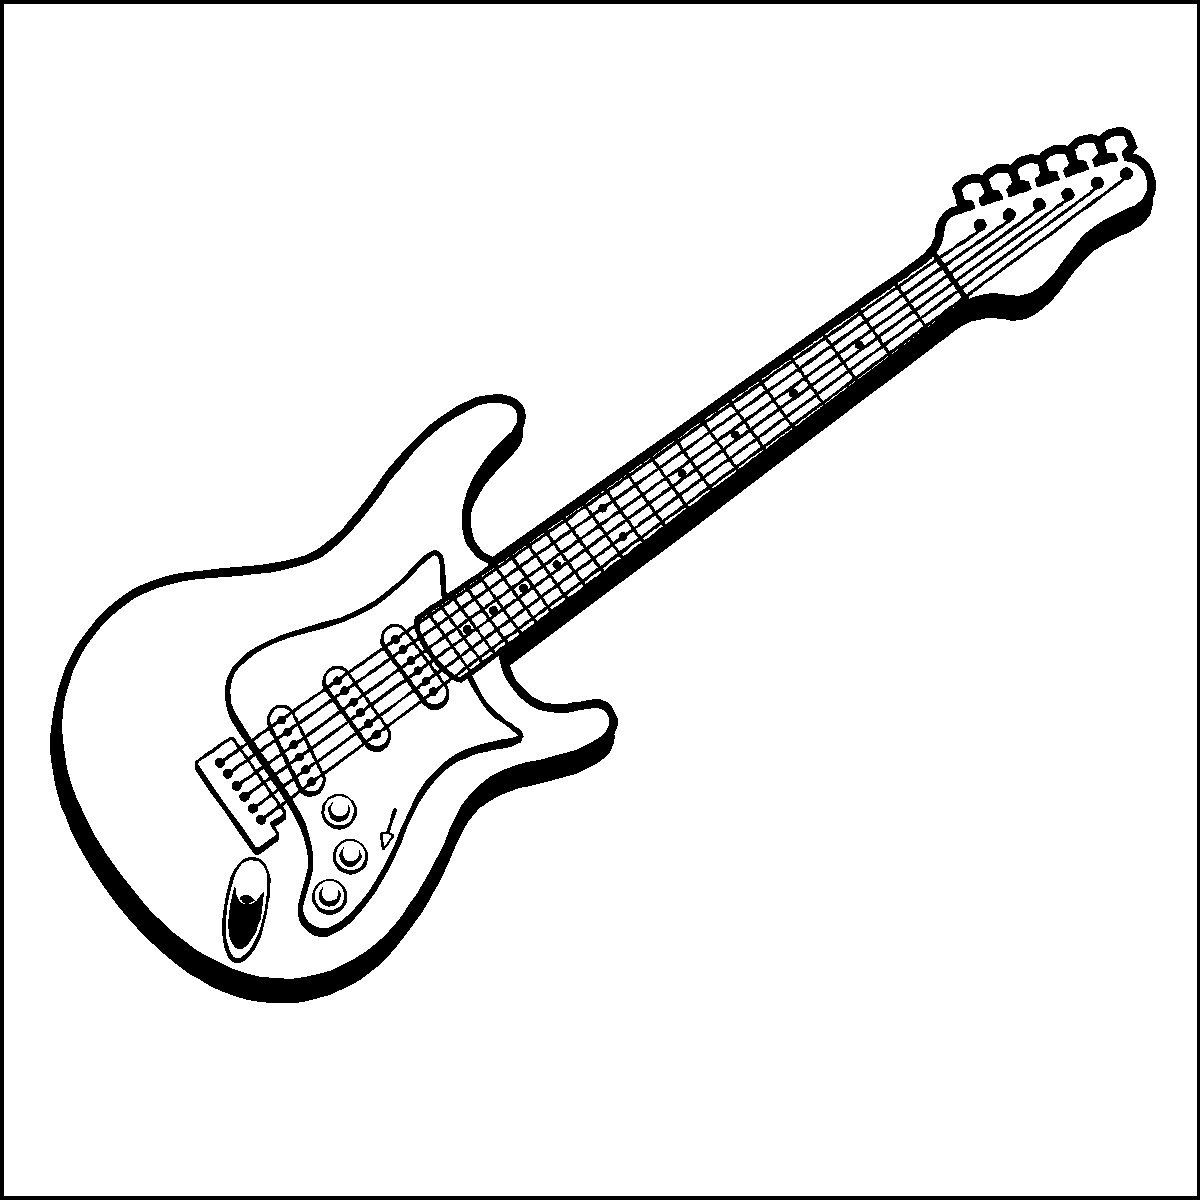 Guitar clipart photograph. Electric coloring pages for